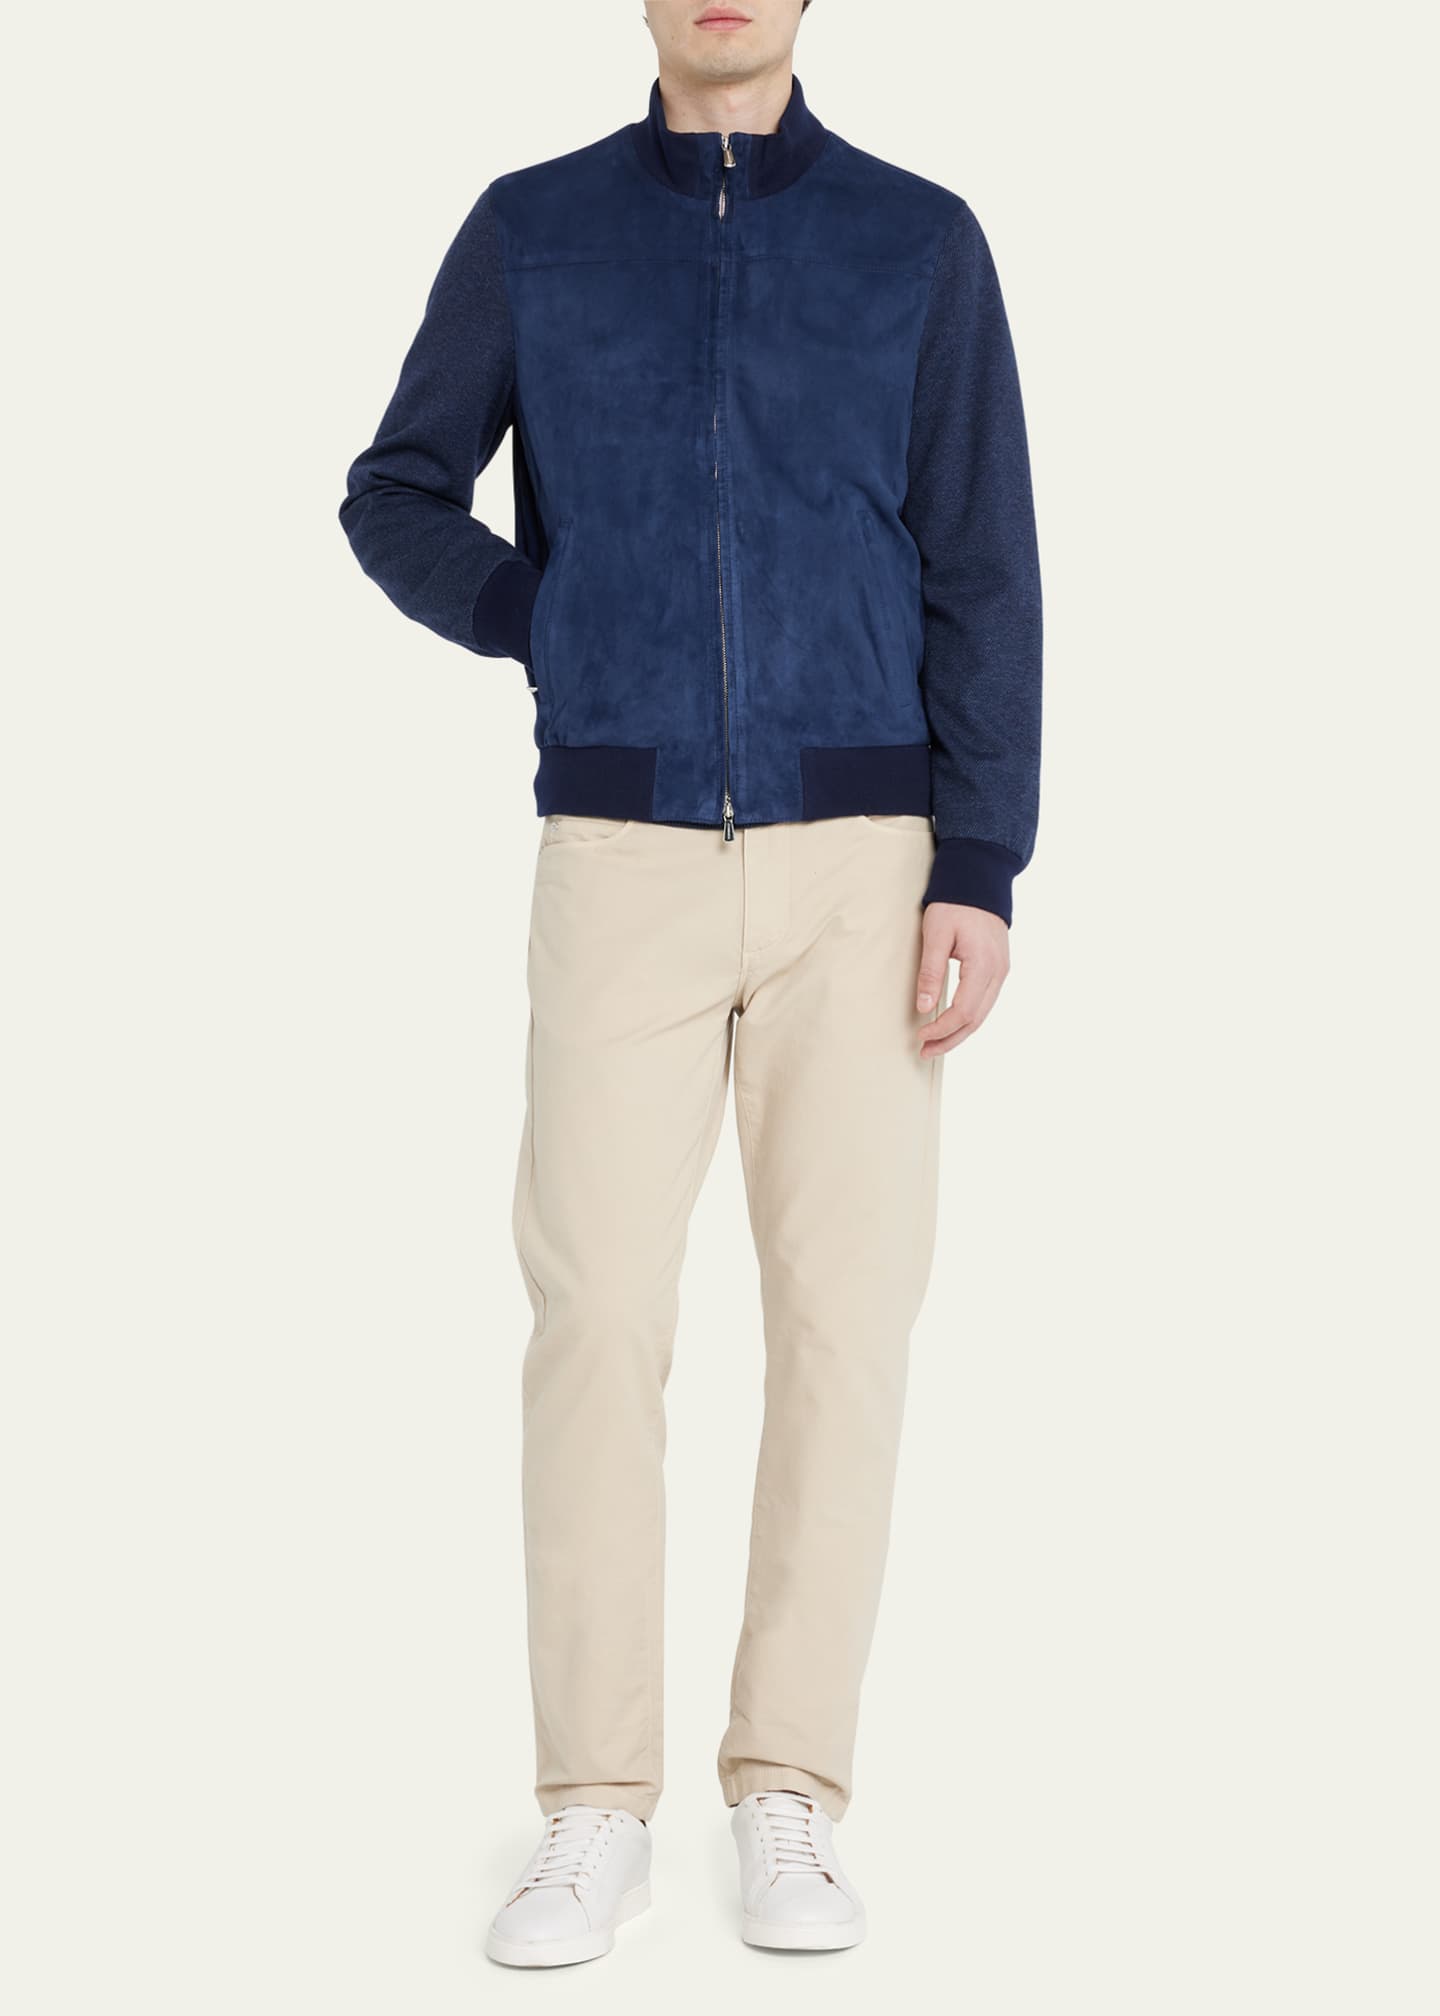 Mandelli Men's Suede Bomber Jacket with Knit Sleeves - Bergdorf